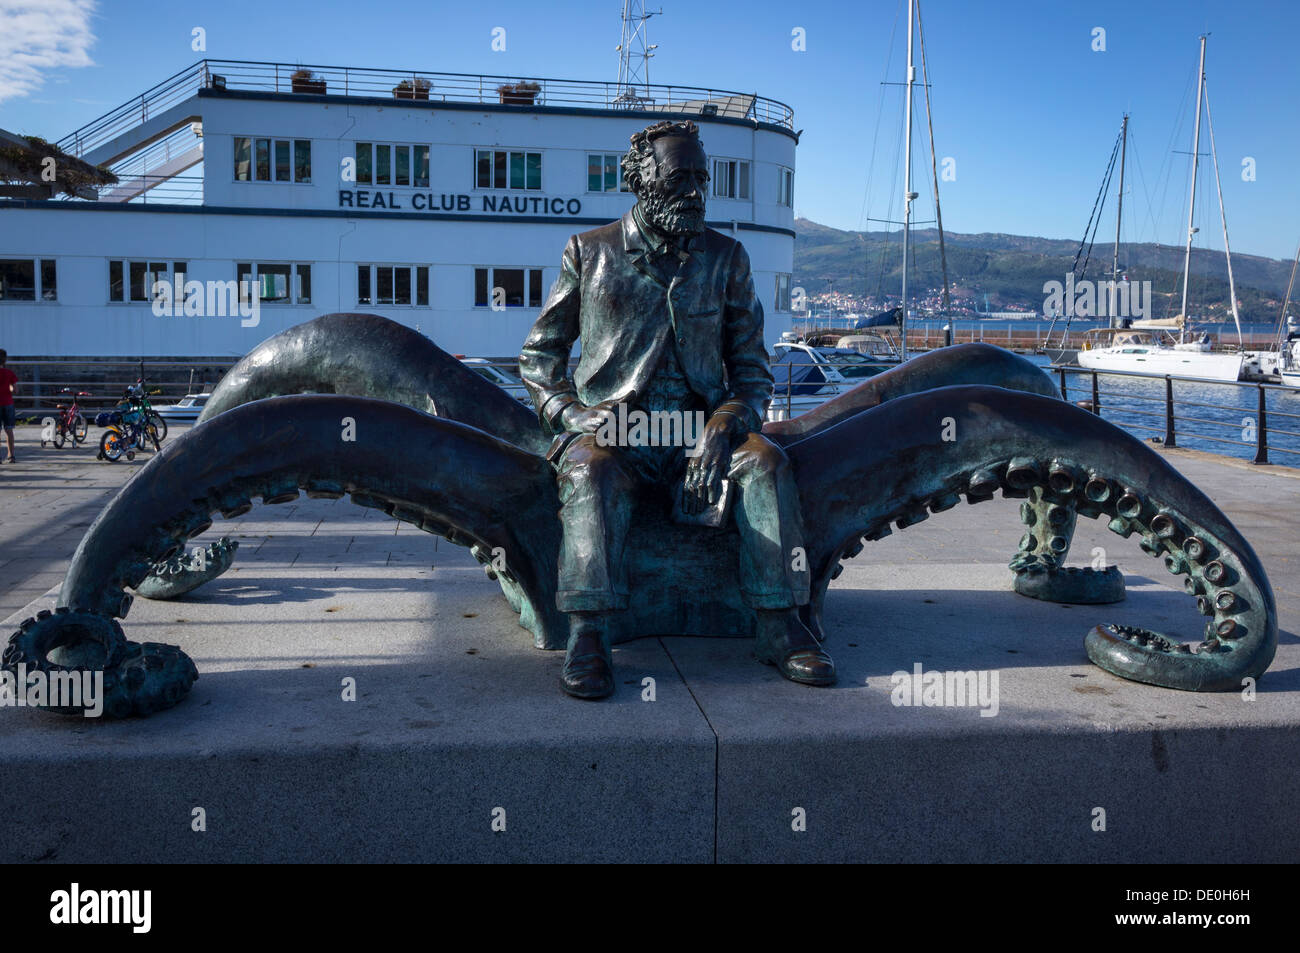 Sculpture tribute to Jules Verne, which mentions the city of Vigo in his book Twenty Thousand Leagues Under the Sea. Stock Photo